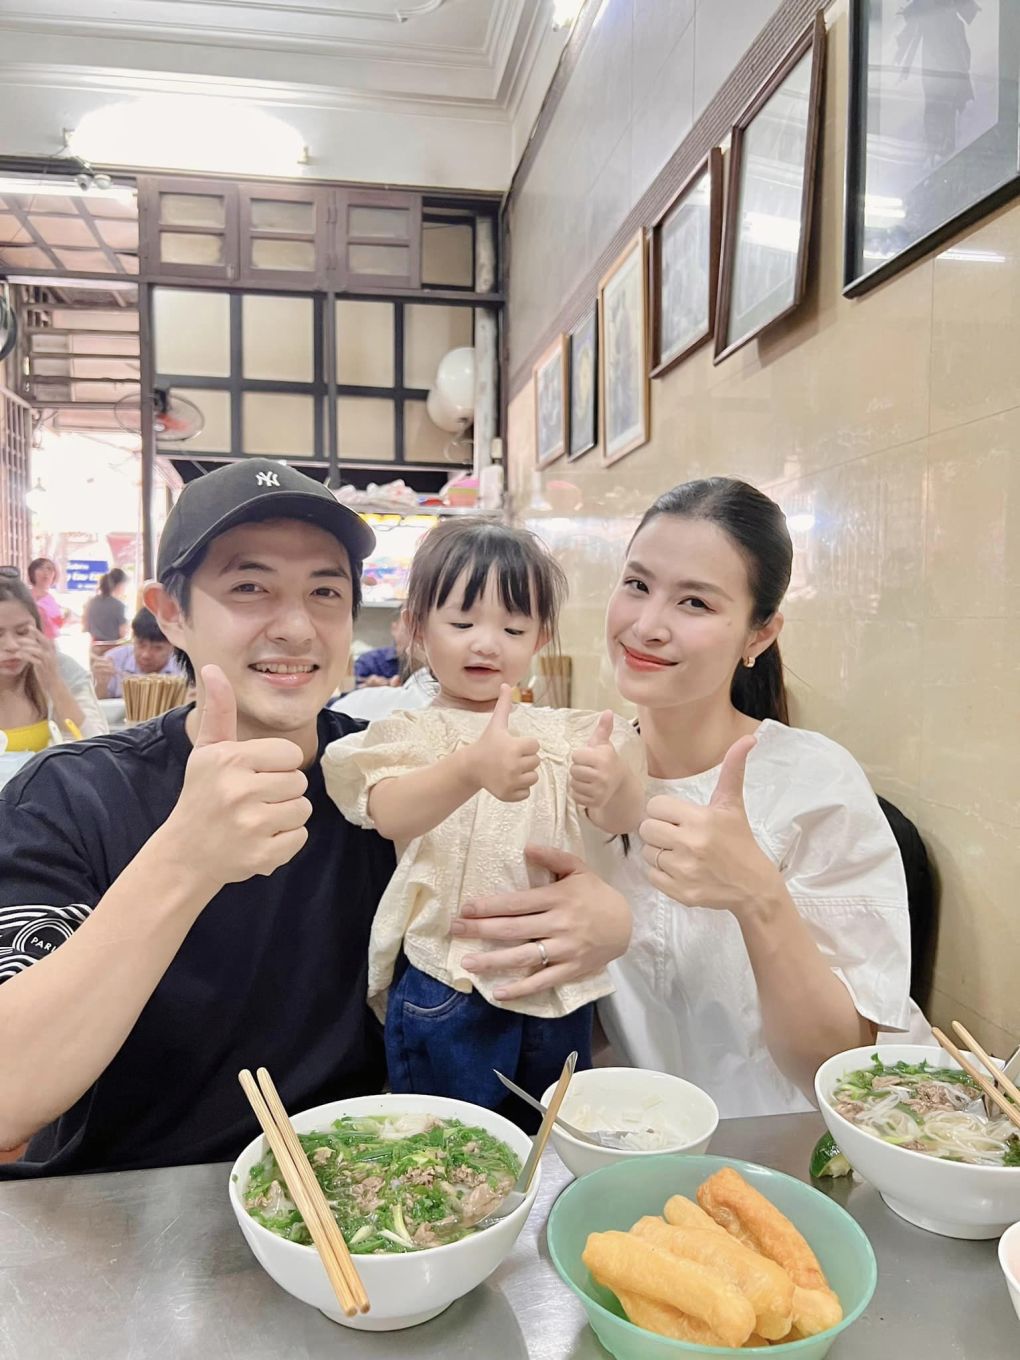 Vietnamese stars every time they come to Hanoi, do not forget to visit the shops to enjoy these “cabinet dishes”., eatery, Grilled spring rolls, Mr. Cao Thang, personal page, Screen capture, specialty dish